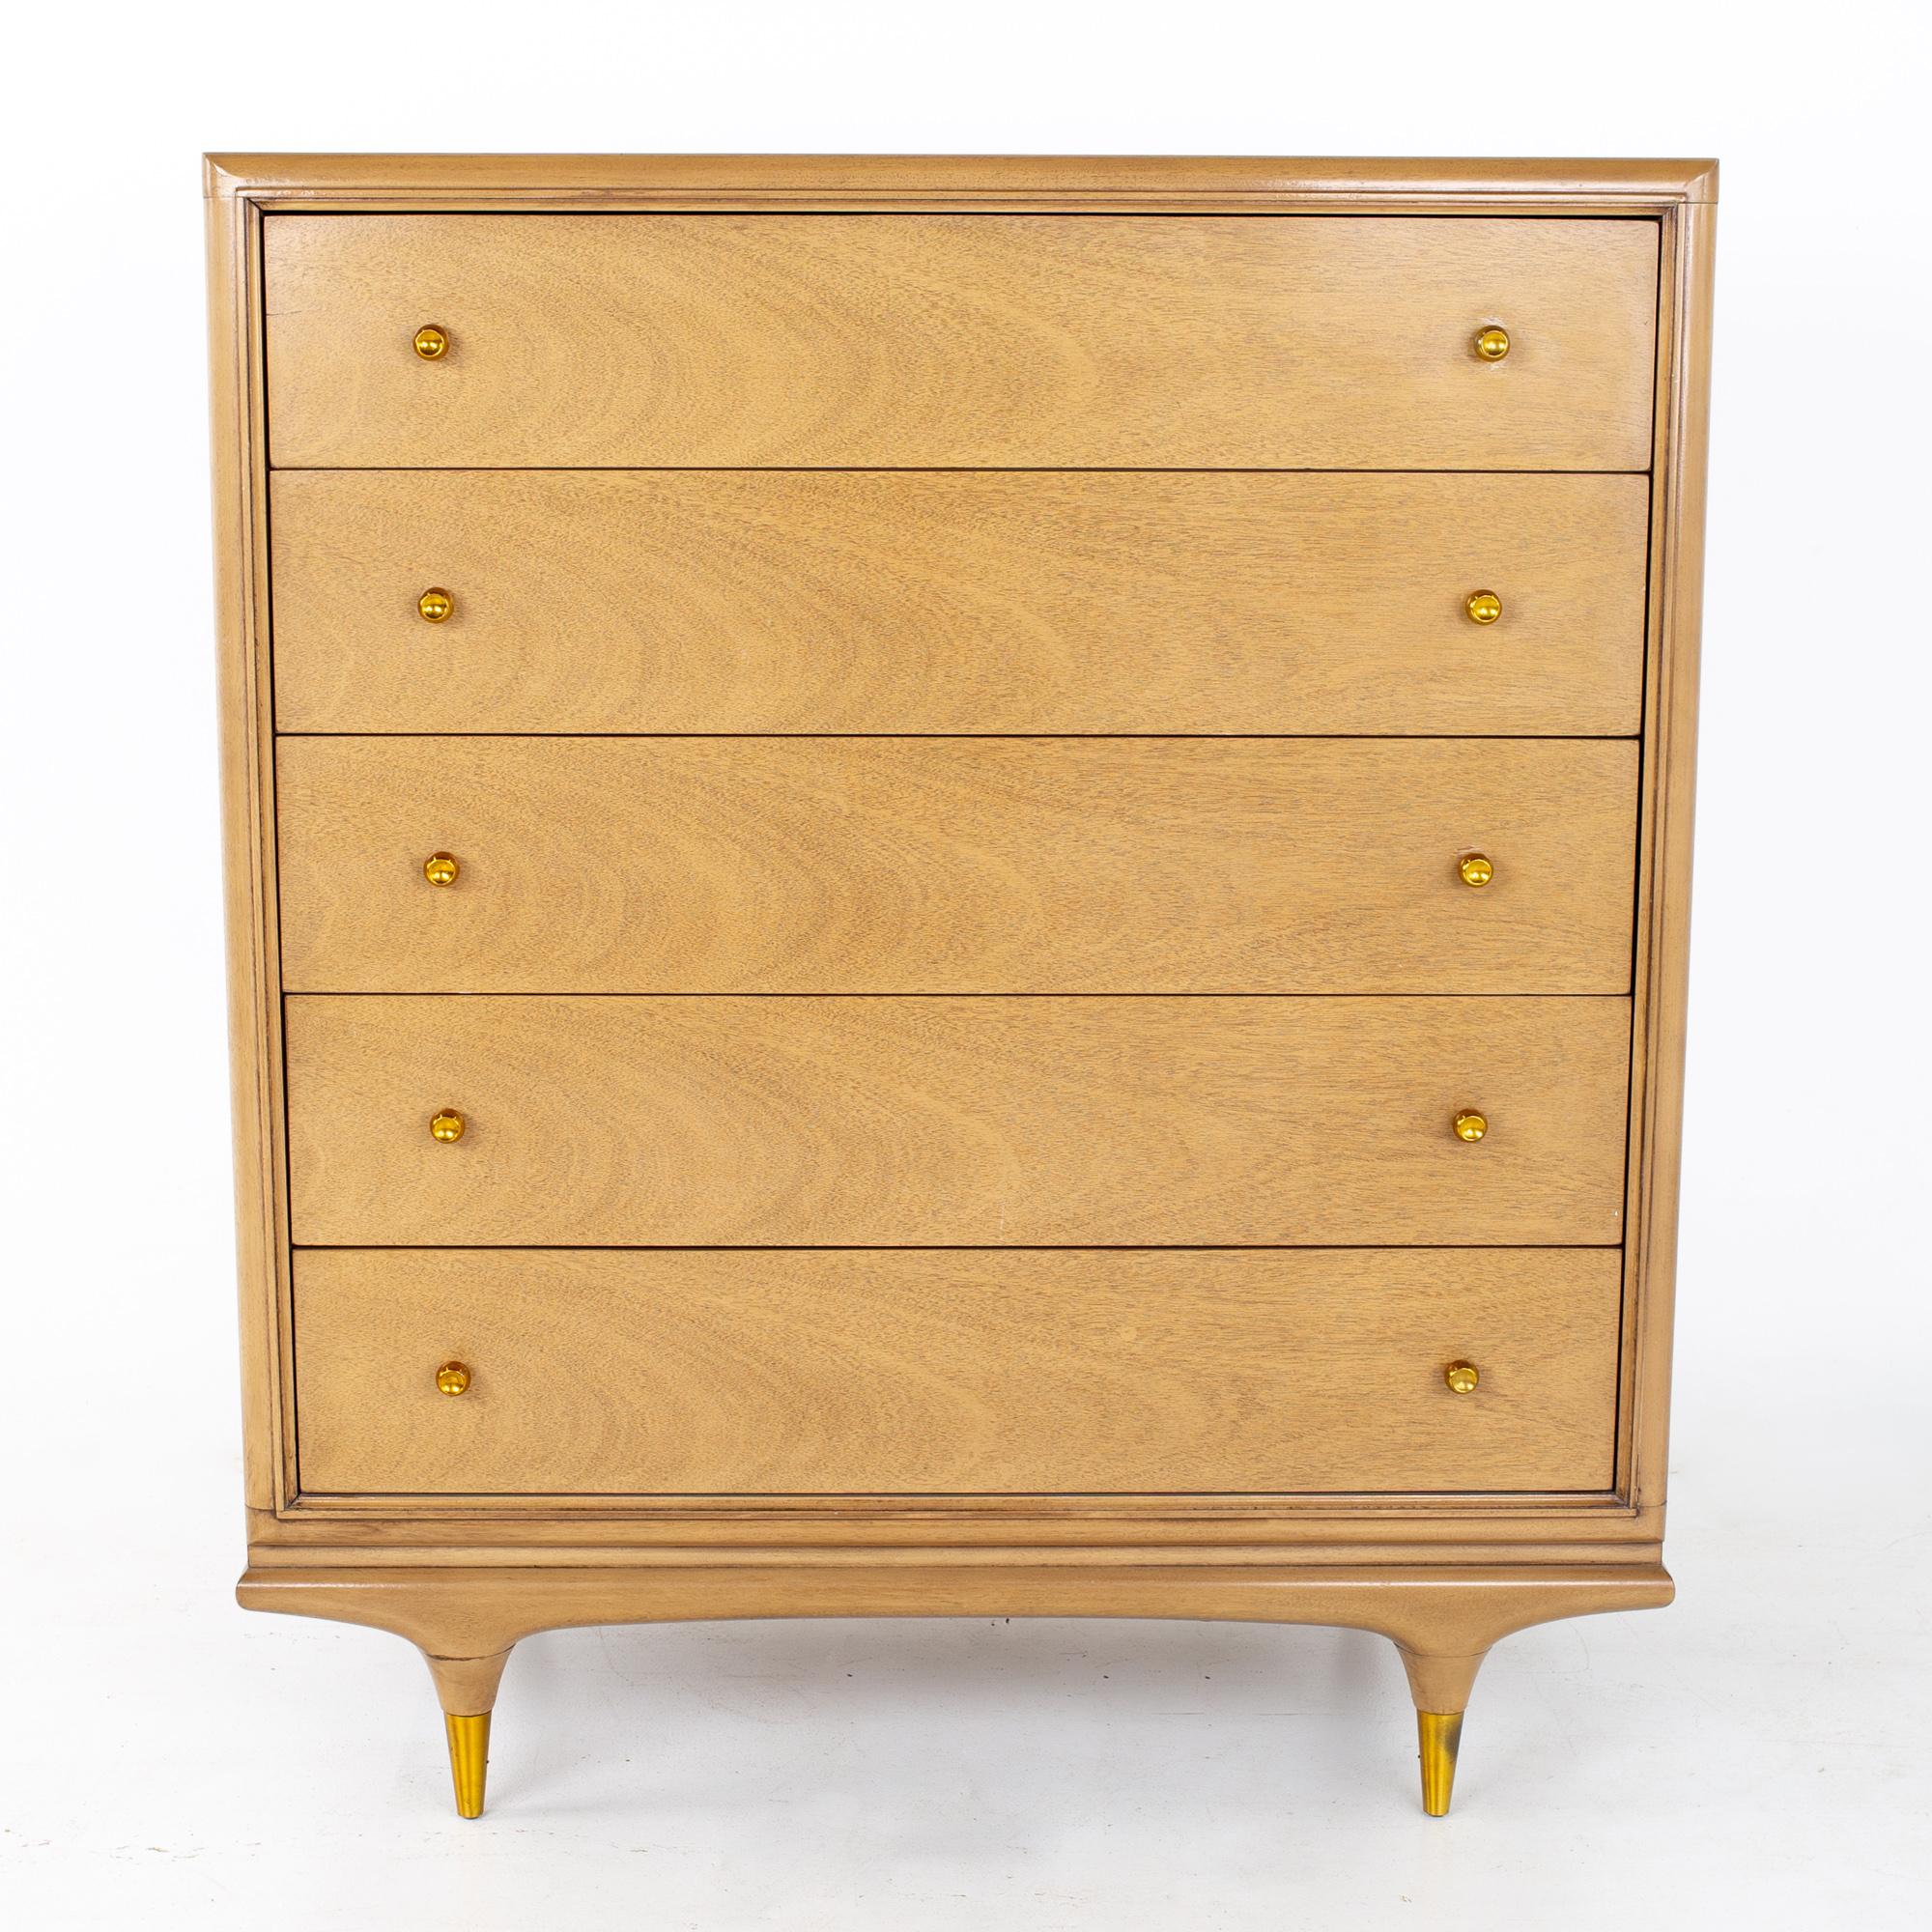 Kent Coffey Continental mid century 5 drawer highboy dresser

Dresser measures: 40 wide x 21 deep x 47.25 inches high

All pieces of furniture can be had in what we call restored vintage condition. That means the piece is restored upon purchase